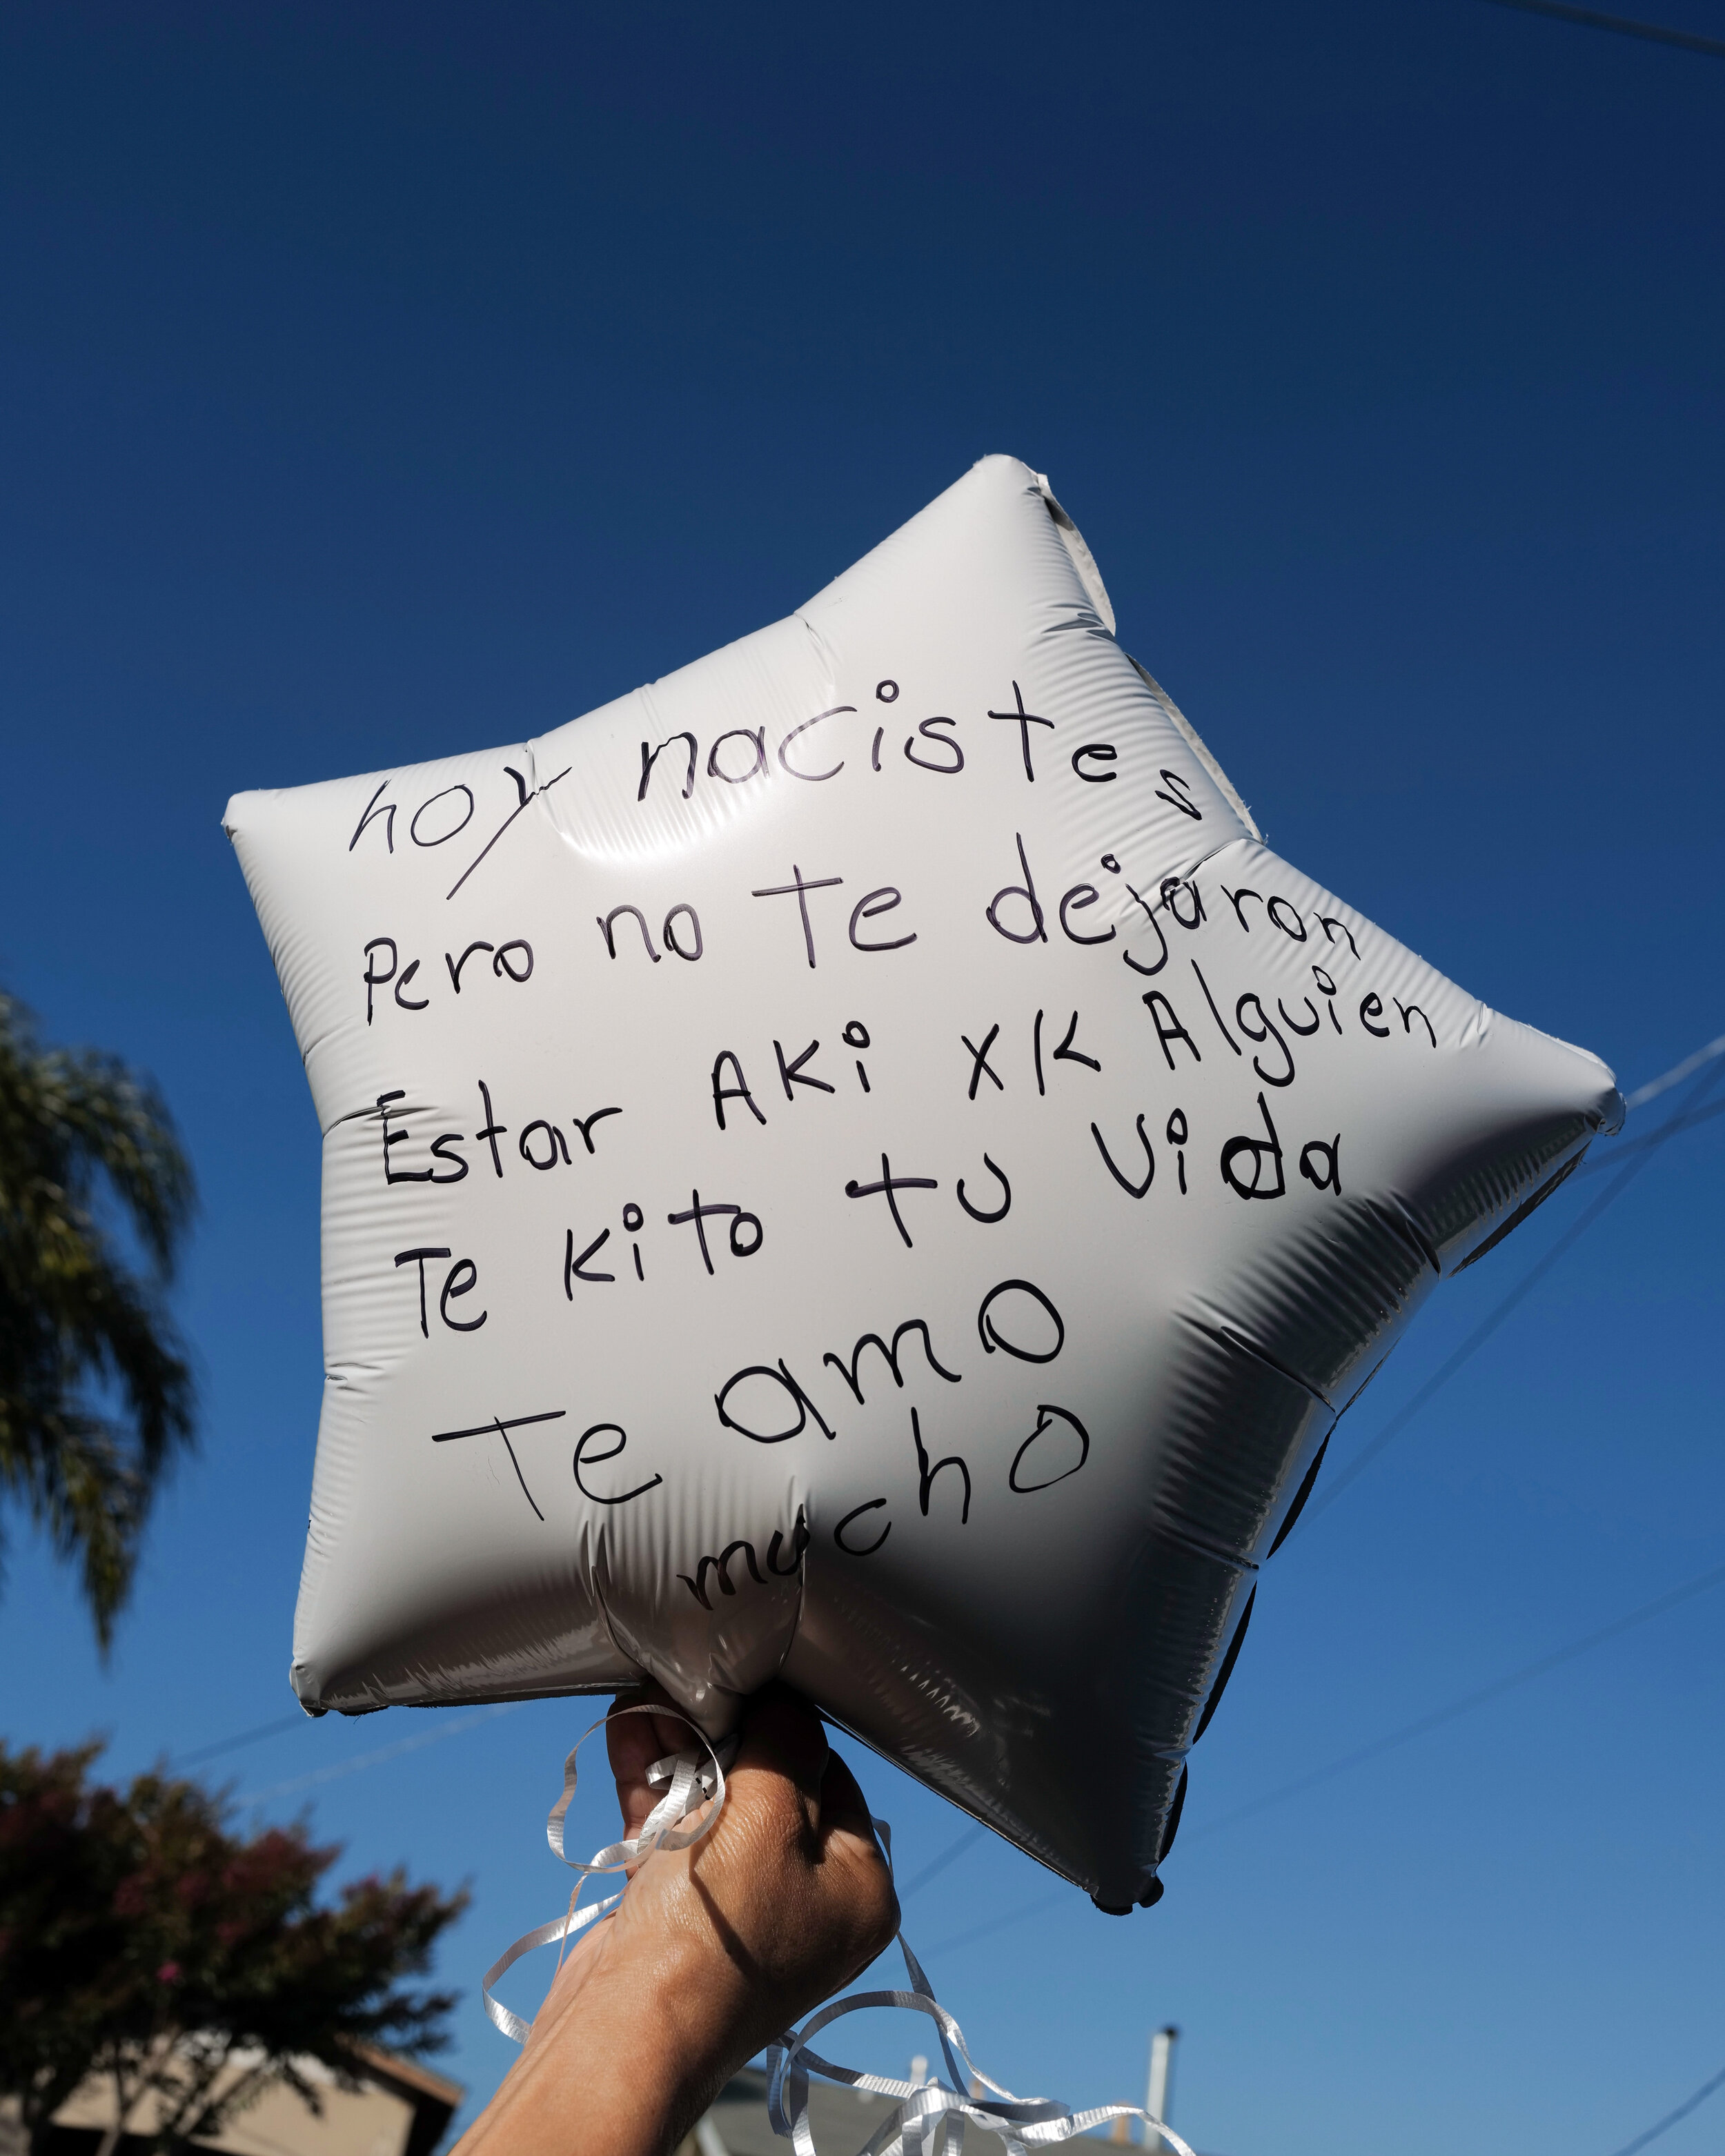  The mother of Erik Salgado holds a balloon for him on what would have been his 24th birthday. Erik Salgado was killed on June 6, 2020 by California Highway Patrol when they fired 40 shots into his car, injuring his pregnant girlfriend and causing he